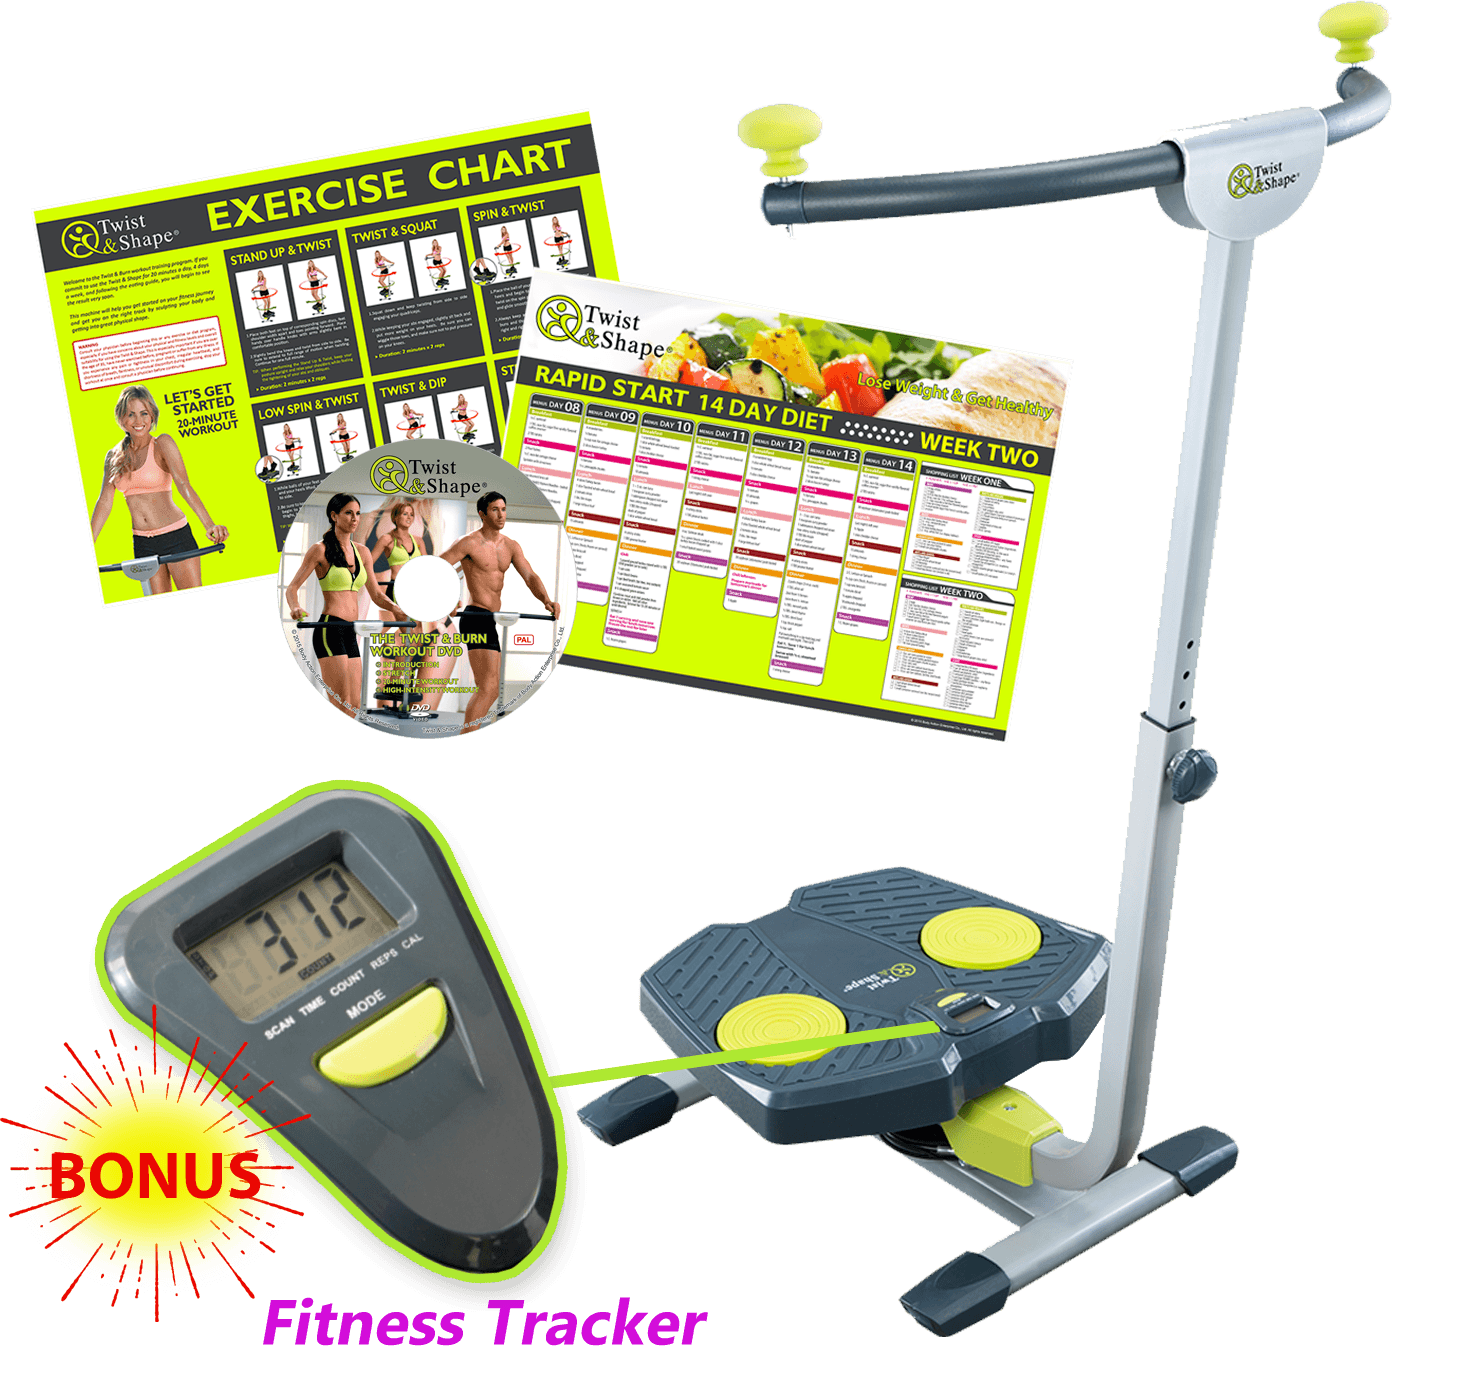 Twist and shape comes with a built in fitness monitor, exercise dvd, exercise chart, 14 day meal plan, 30 day money back guarantee, you are responsible for shipping the item back to us upon return.